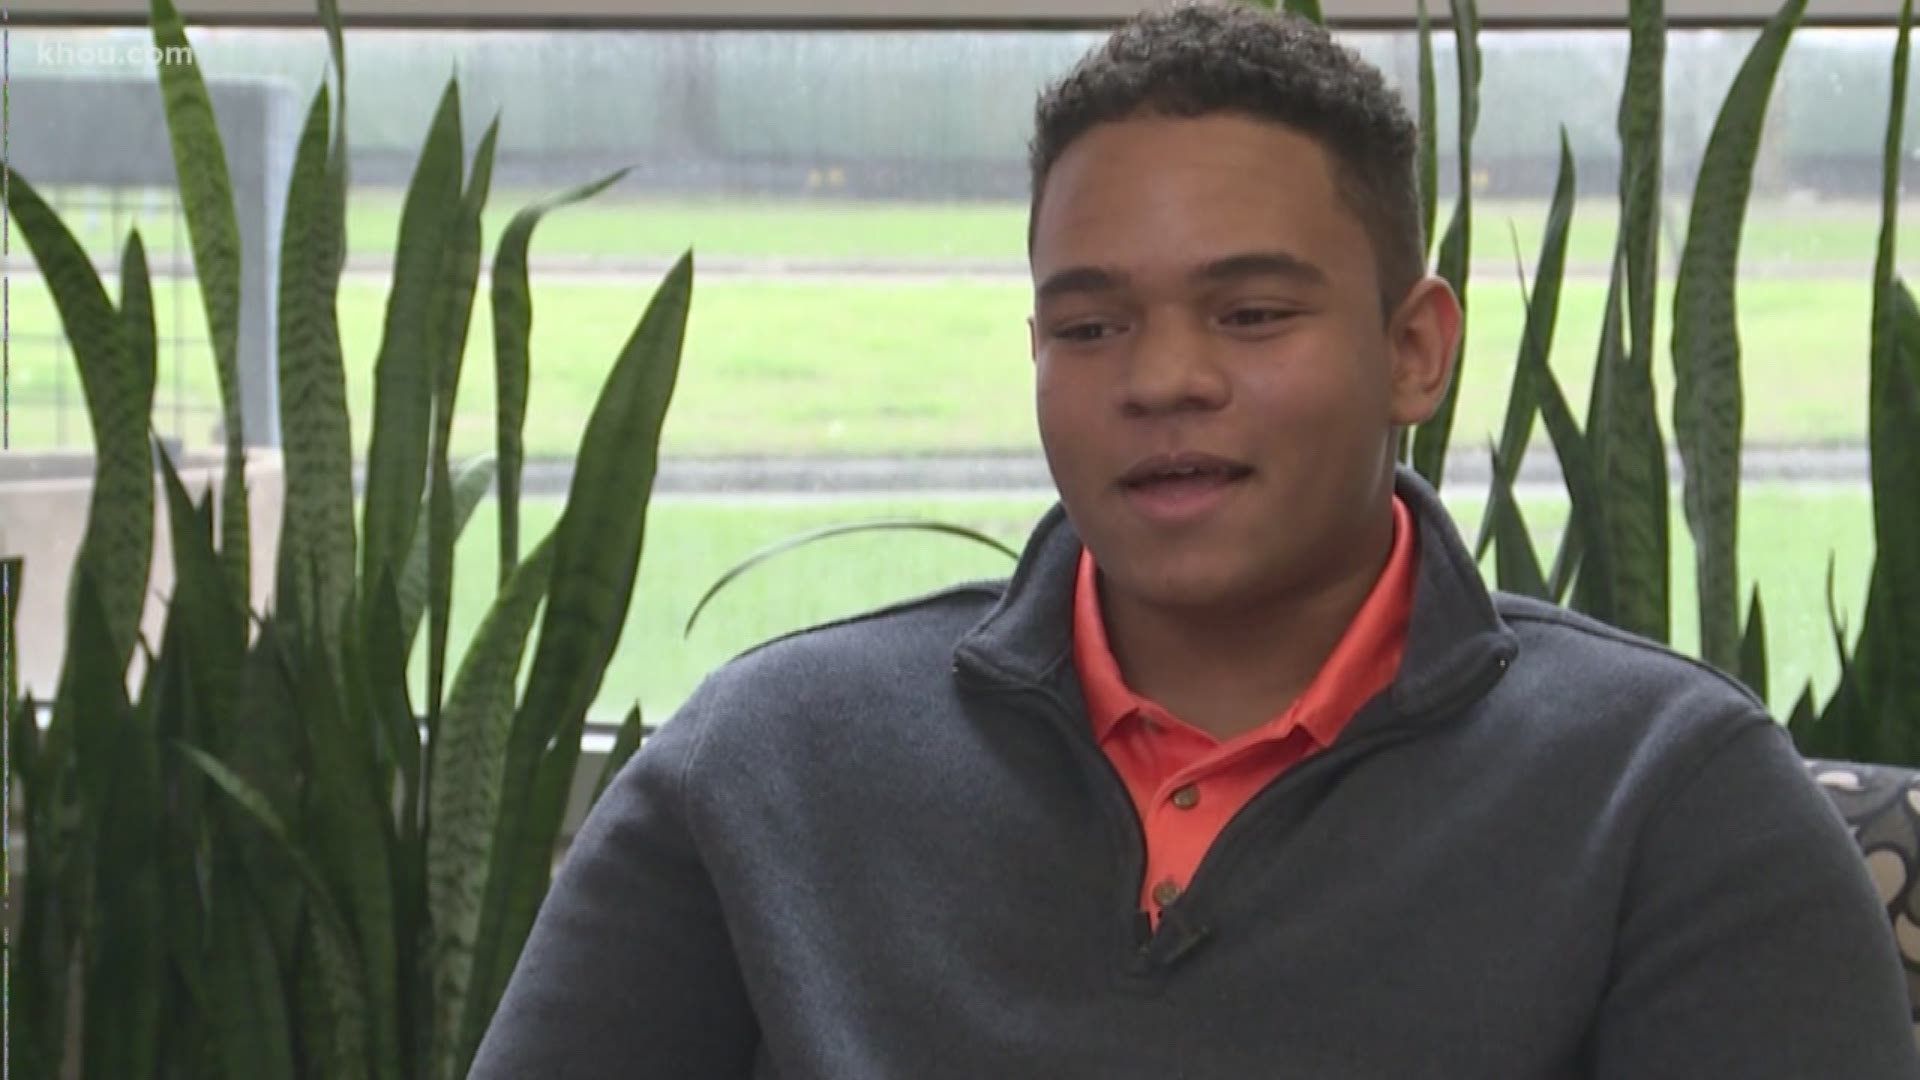 A high school senior has big plans after graduation. Marcel McClinton says he’s running for Houston City Council as soon as he turns 18 years old.